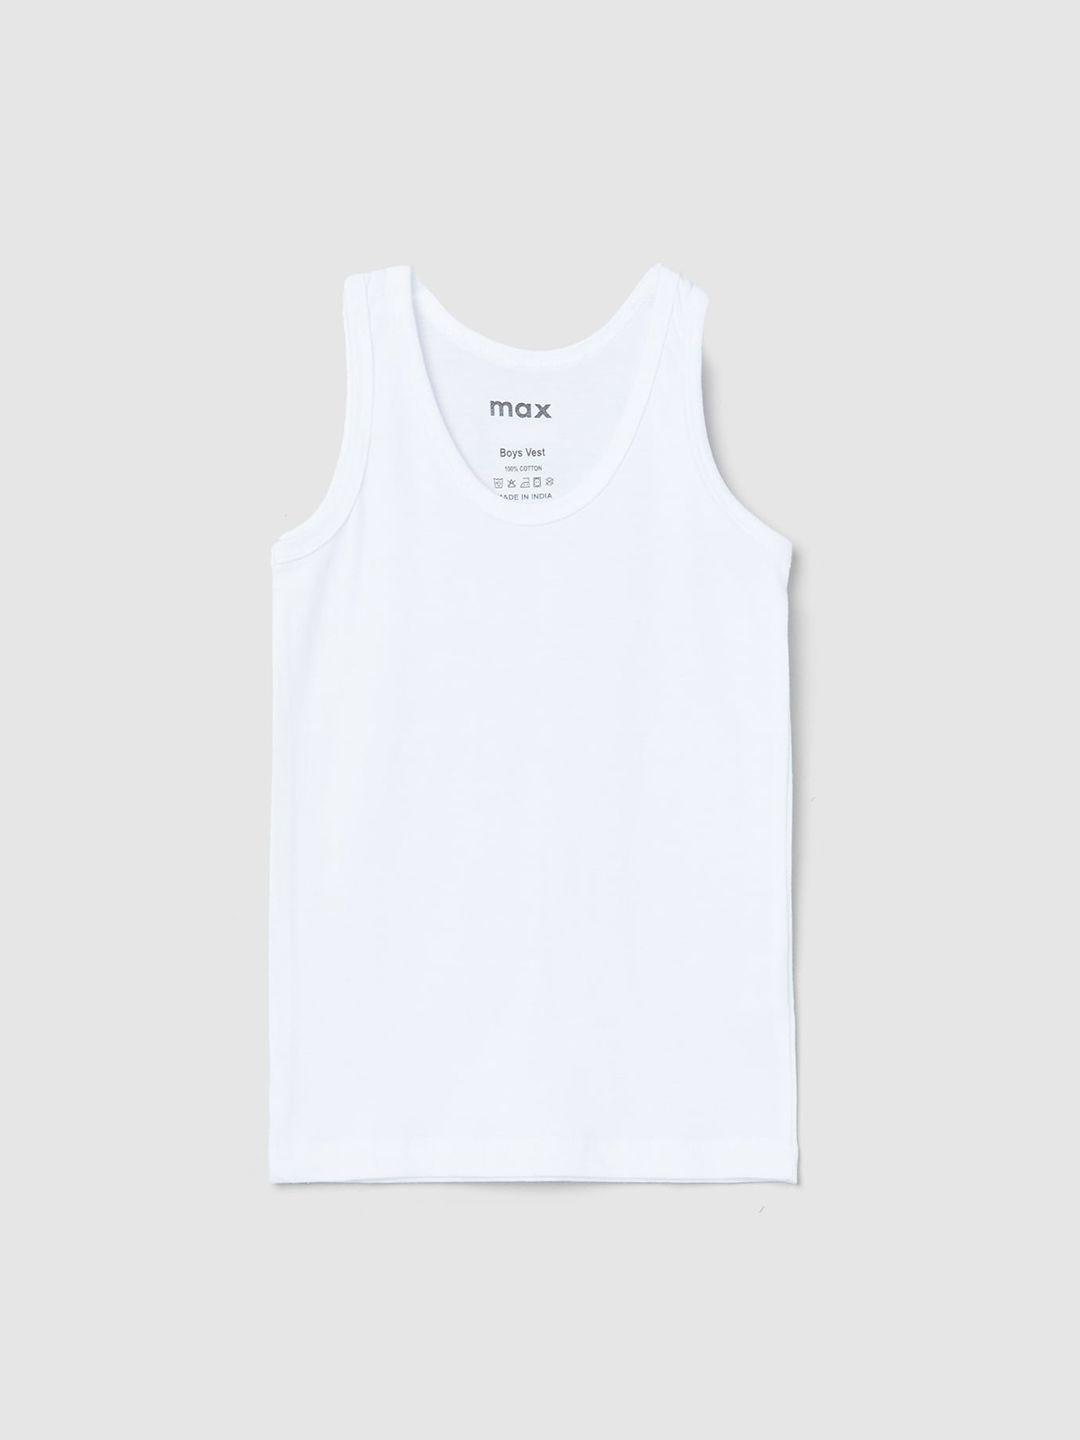 max boys white solid cotton innerwear basic vests